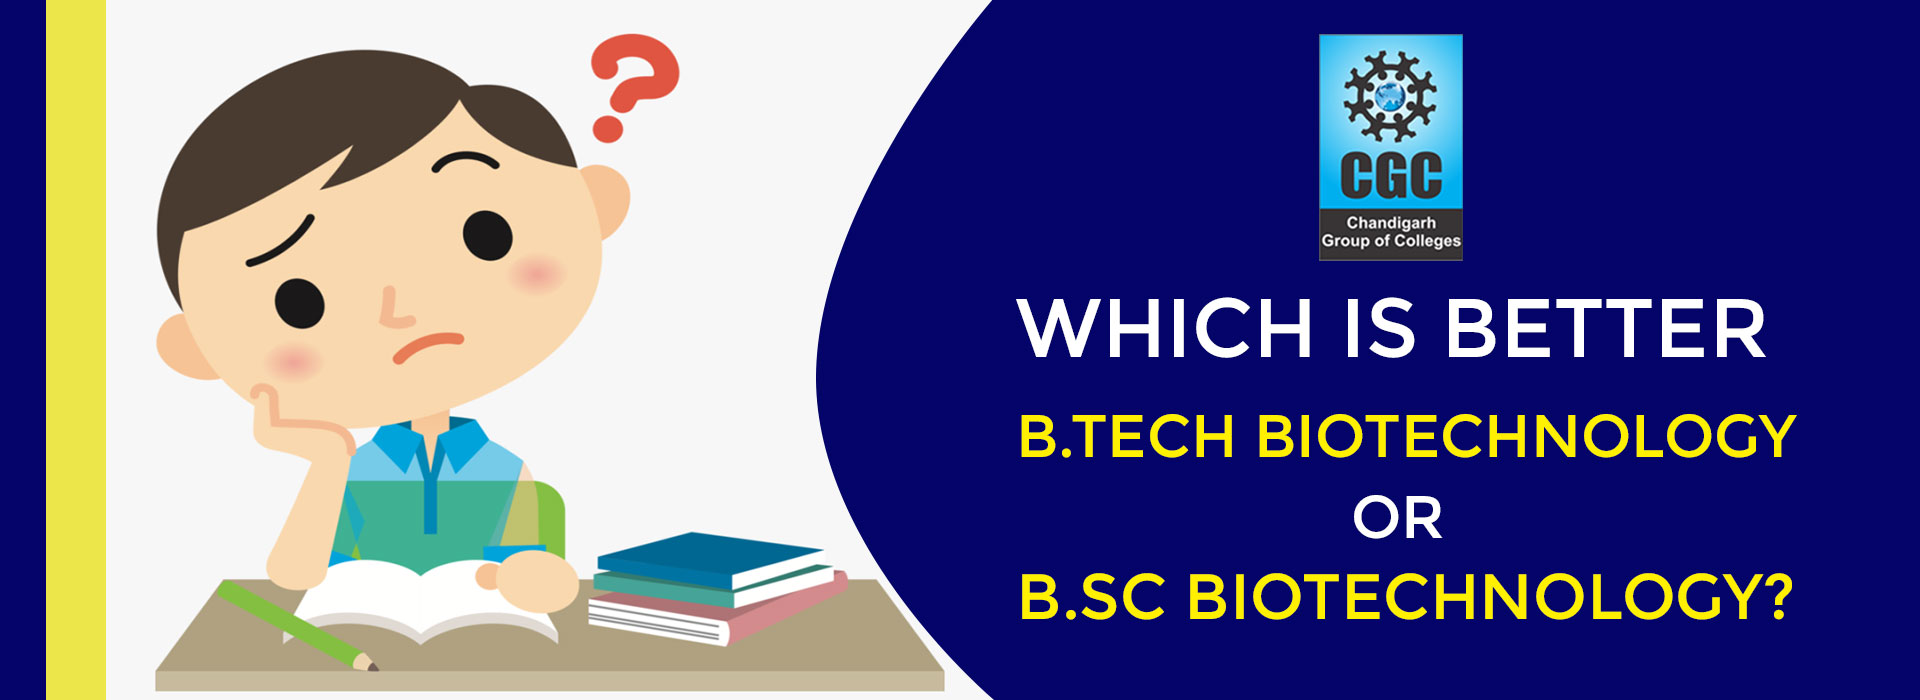 Which is better, B.Tech Biotechnology or B.Sc Biotechnology? 